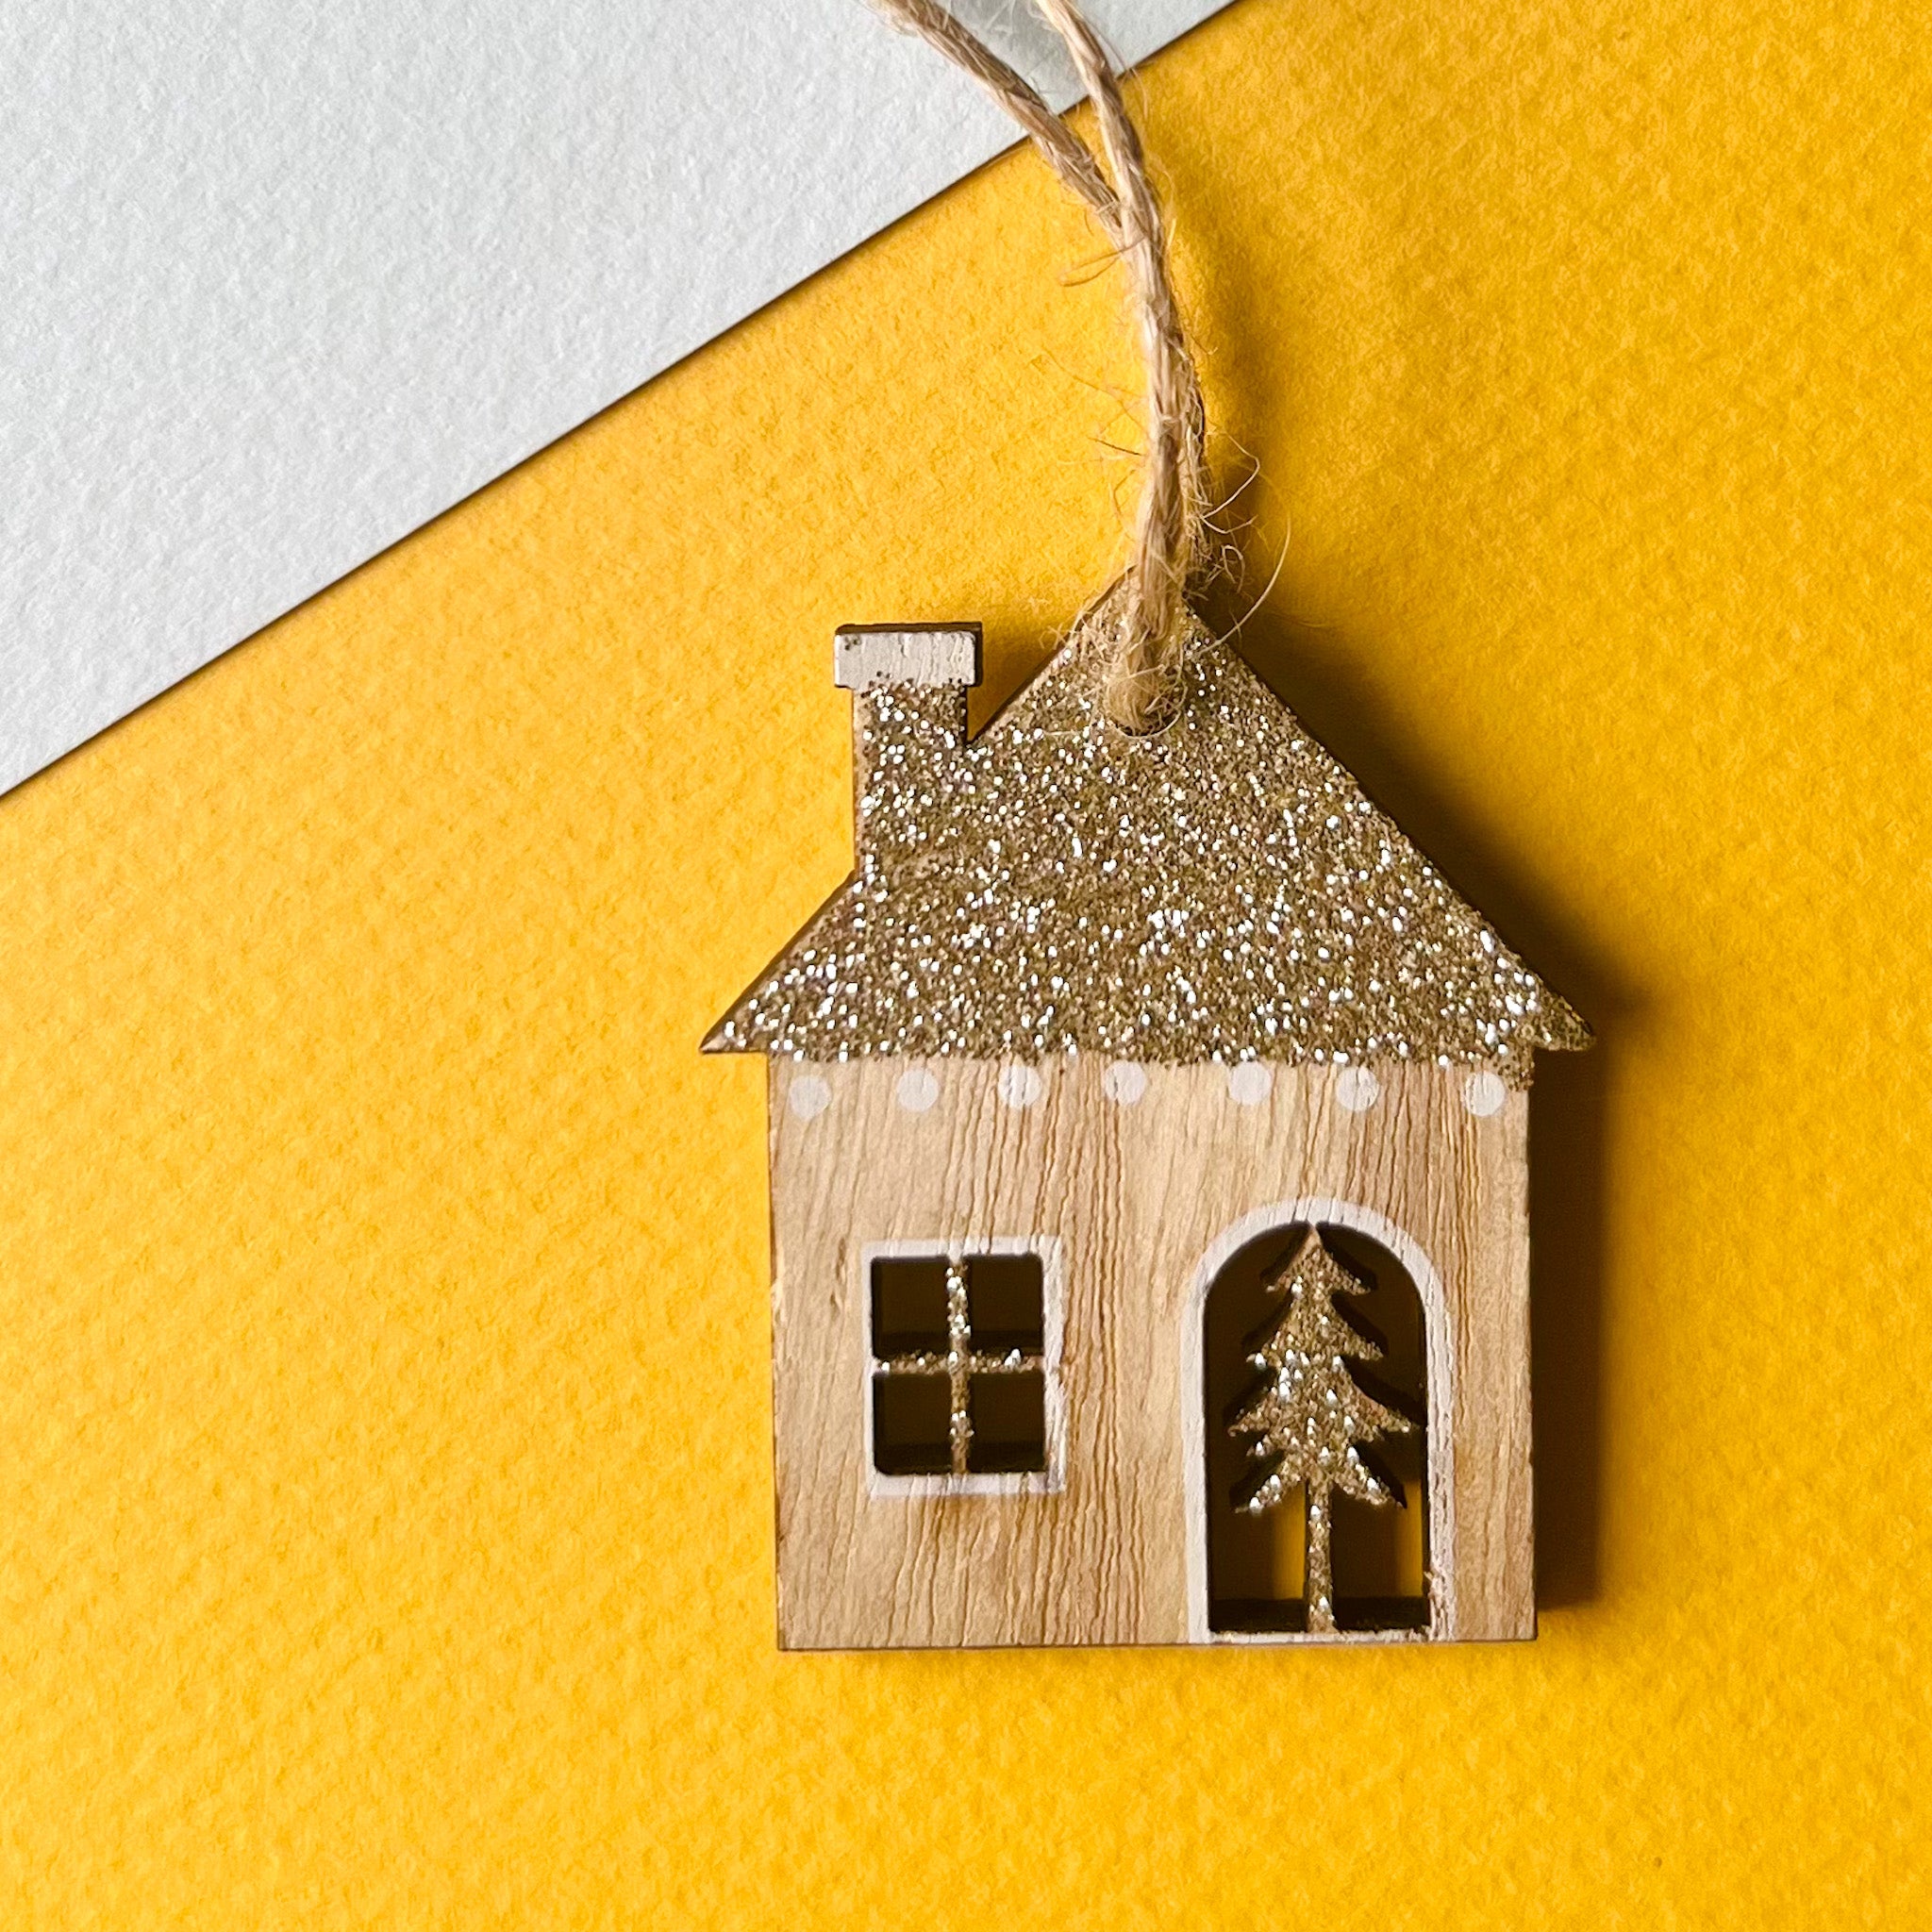 HOUSE WITH TREE IN WINDOW ORNAMENT